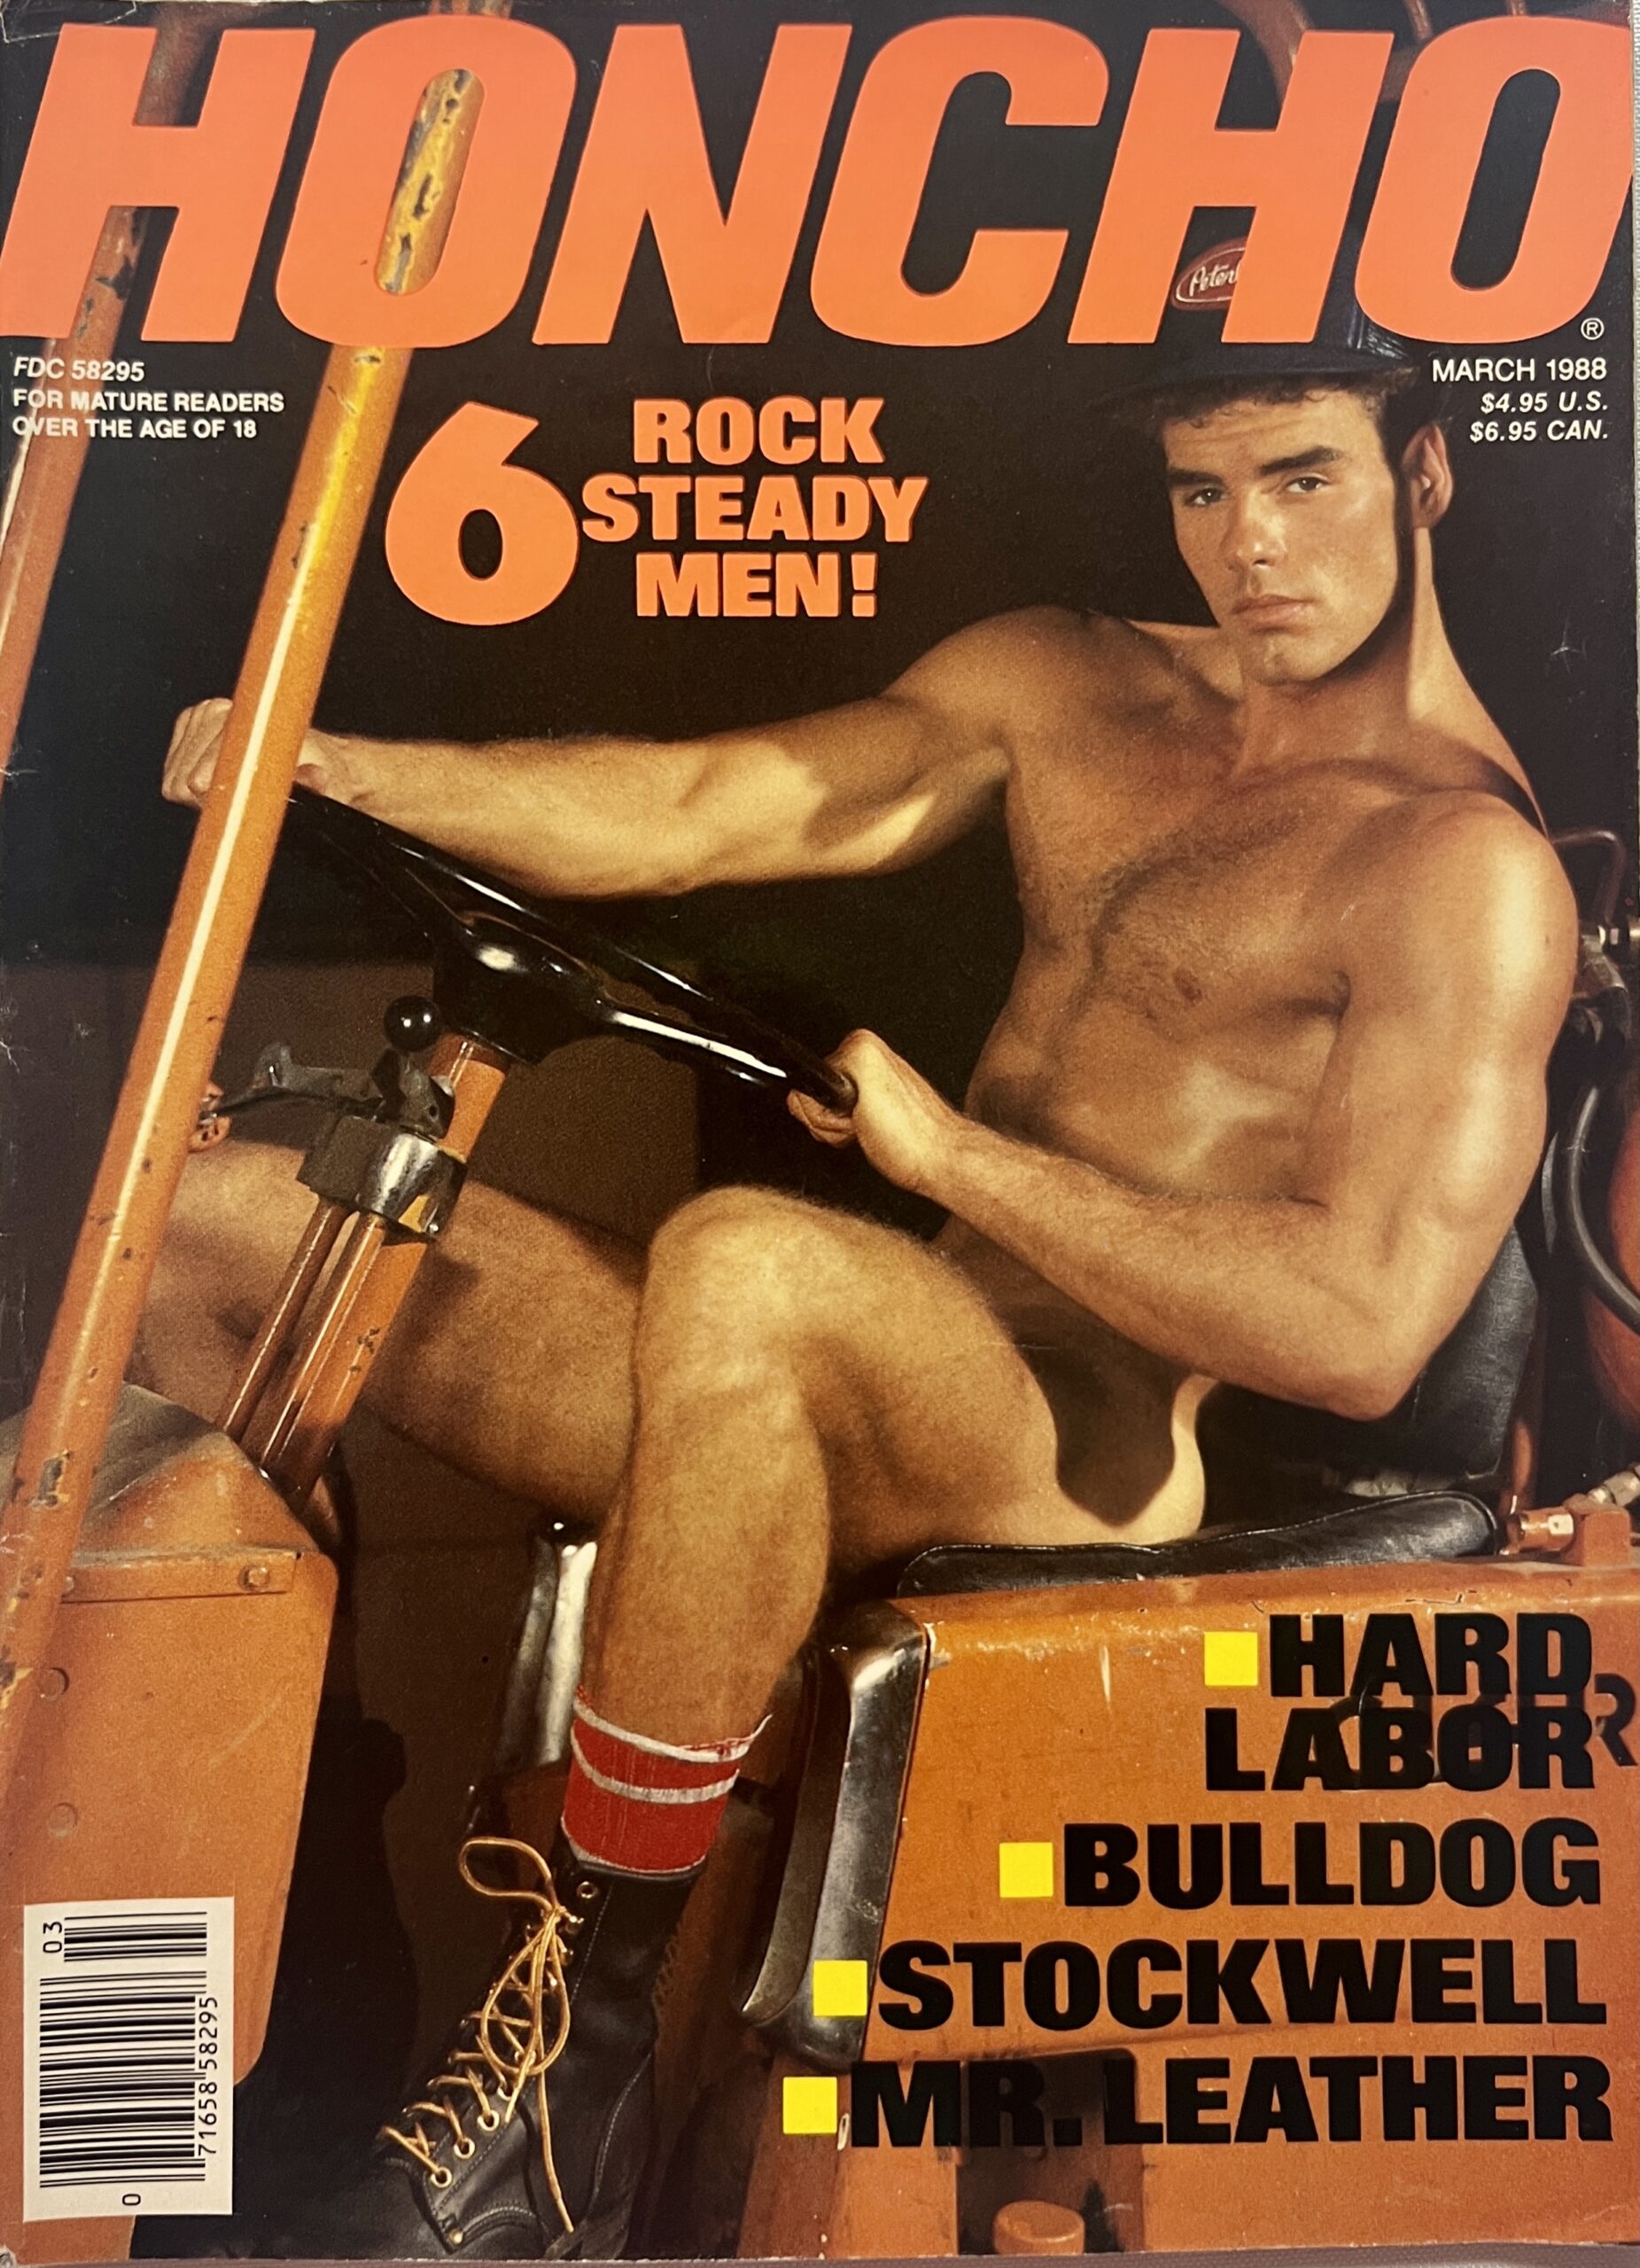 Porn Dvd Covers 1980s - Gay Porn Magazine Covers | Gay Fetish XXX